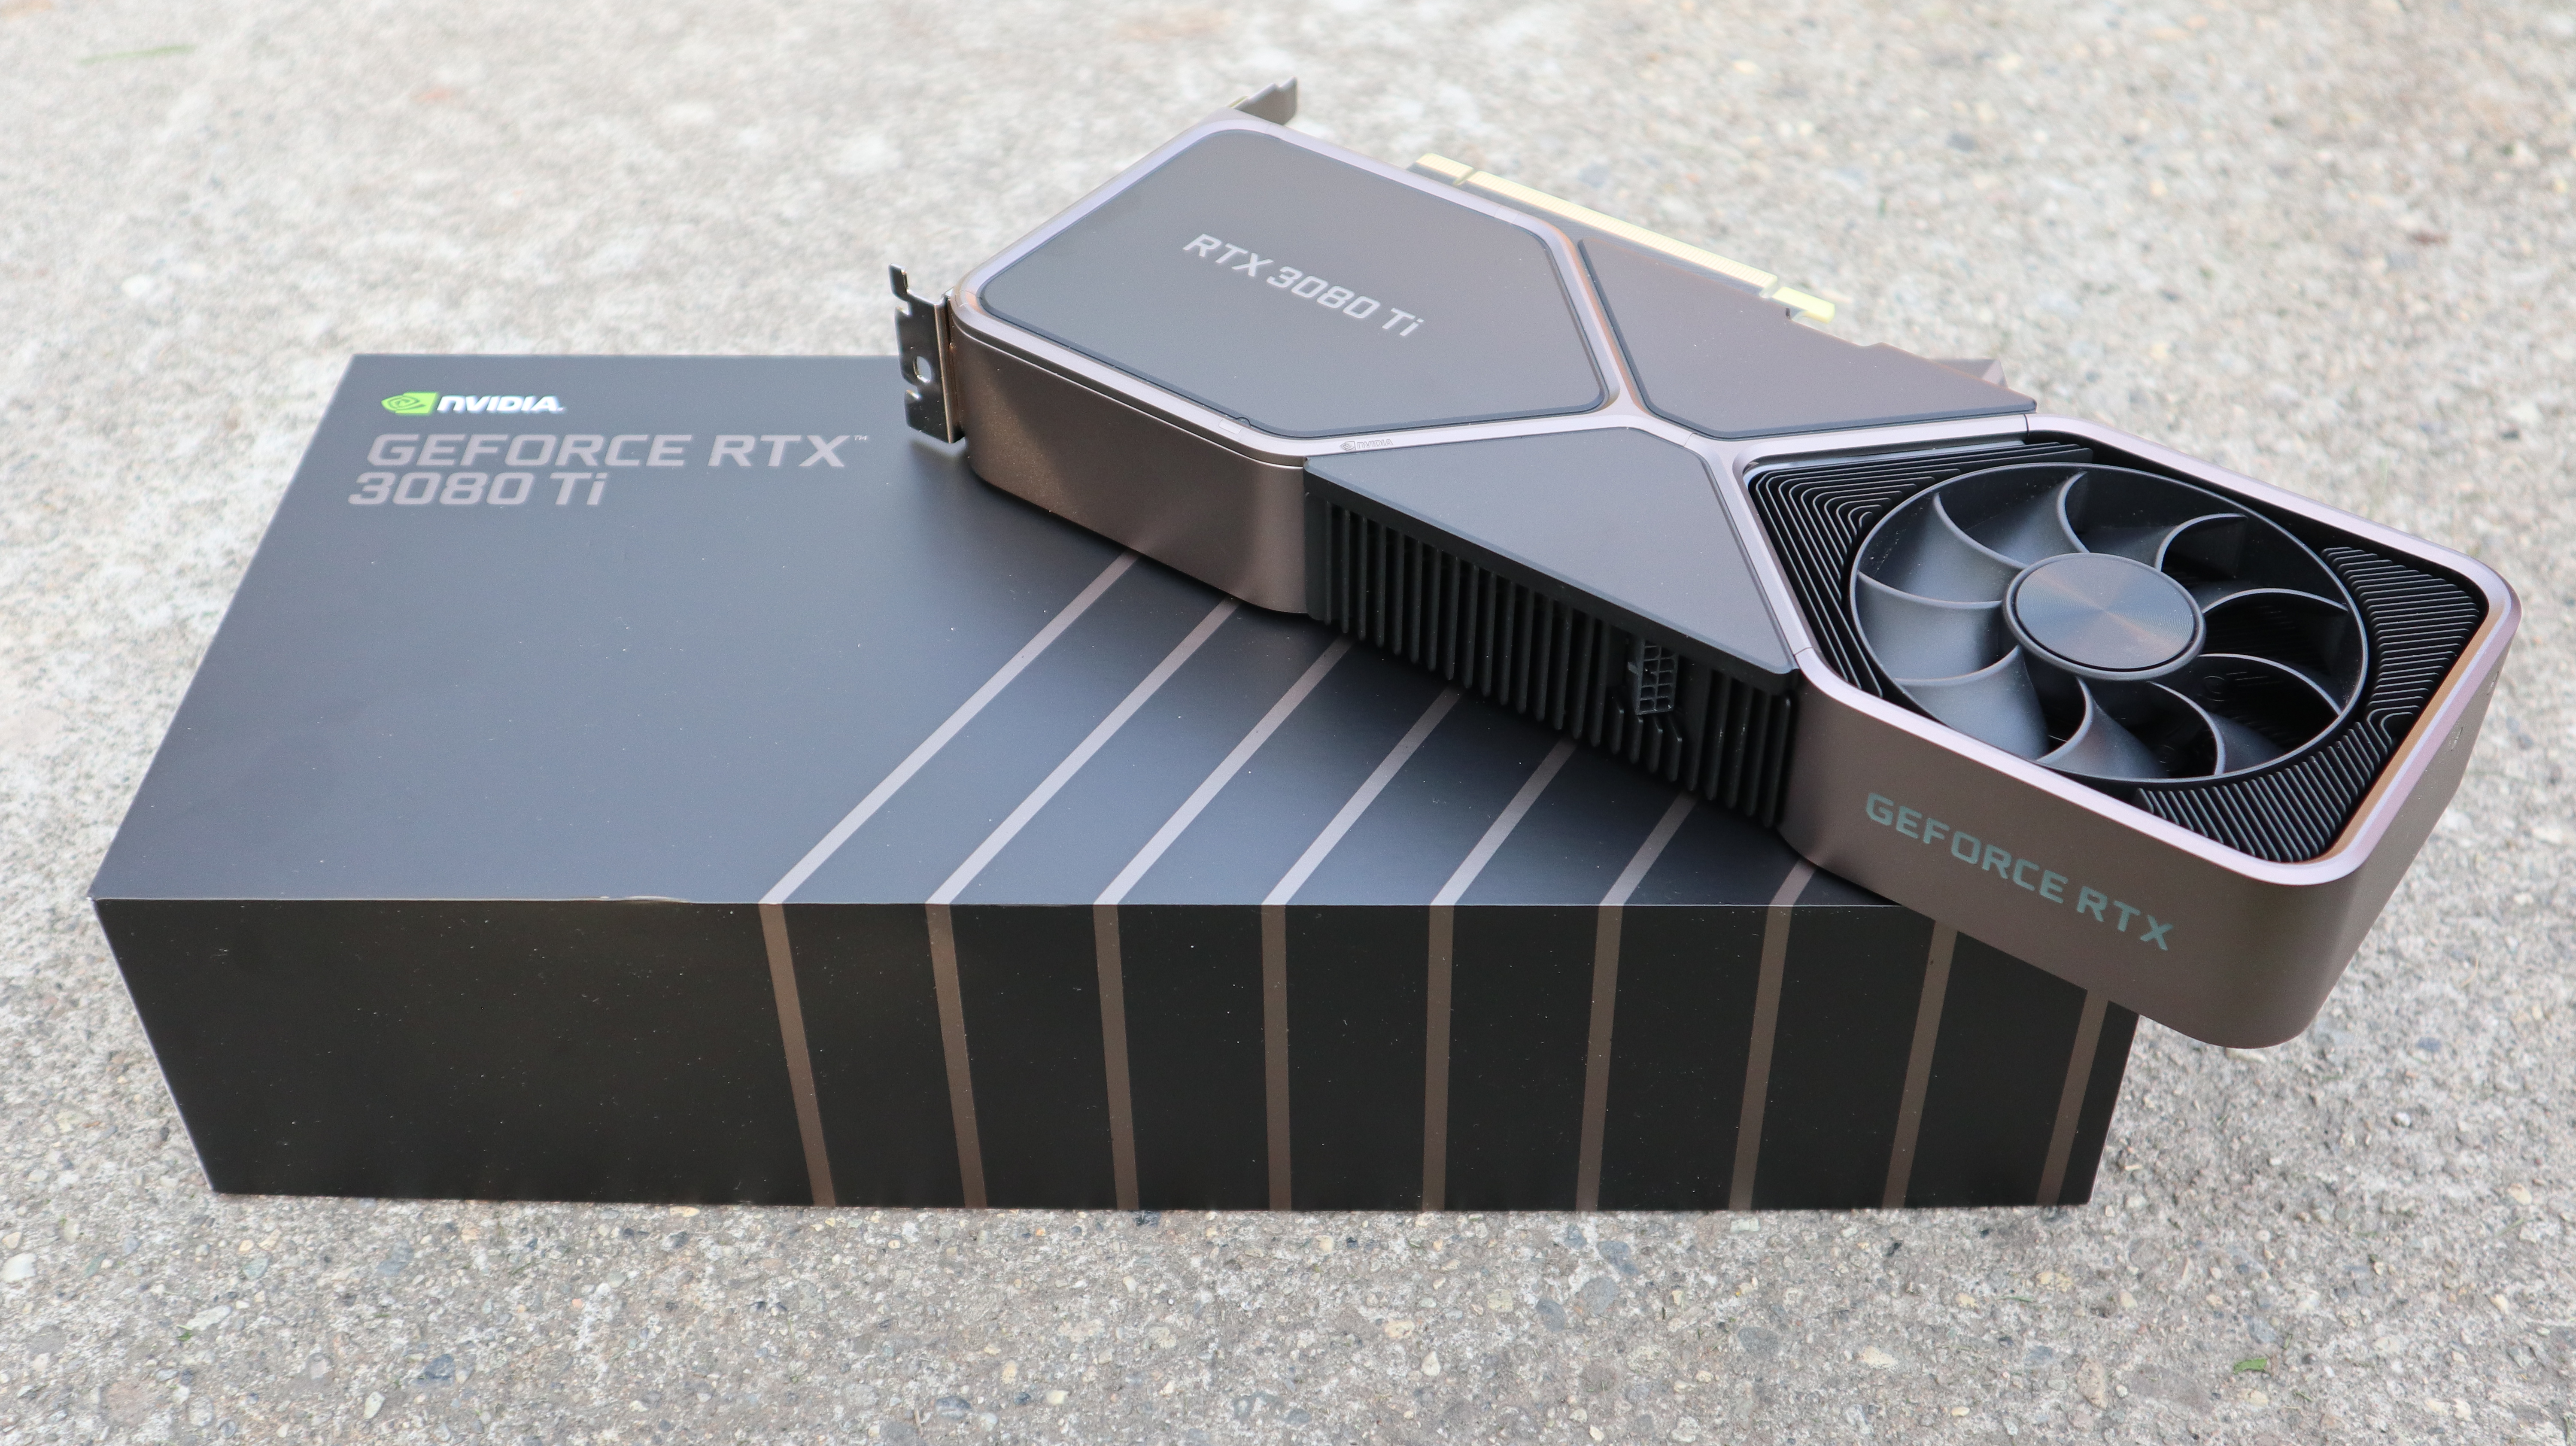 Review: Nvidia RTX 3080 Ti is a powerhouse—but good luck finding it at  $1,199 MSRP